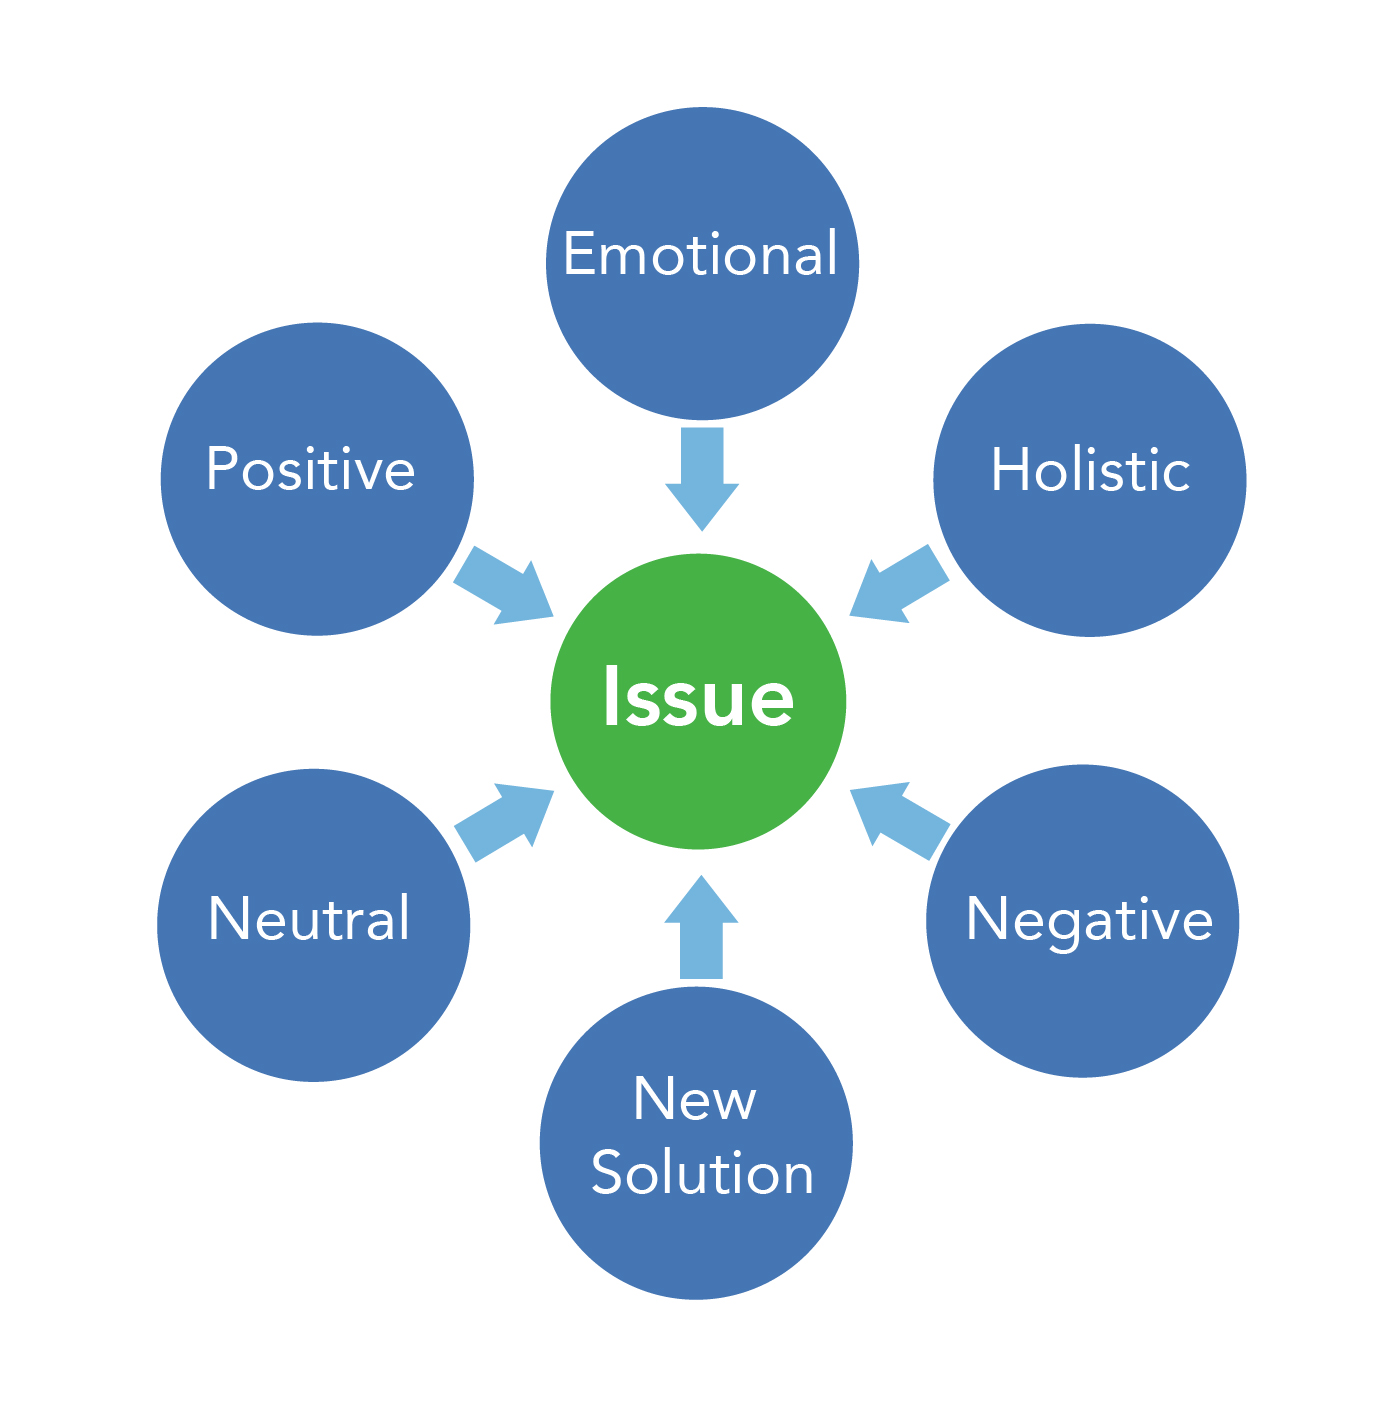 A chart indicating the different ways individuals approach an issue. The positions are natural, emotional, negative, positive, new solution, and holistic.